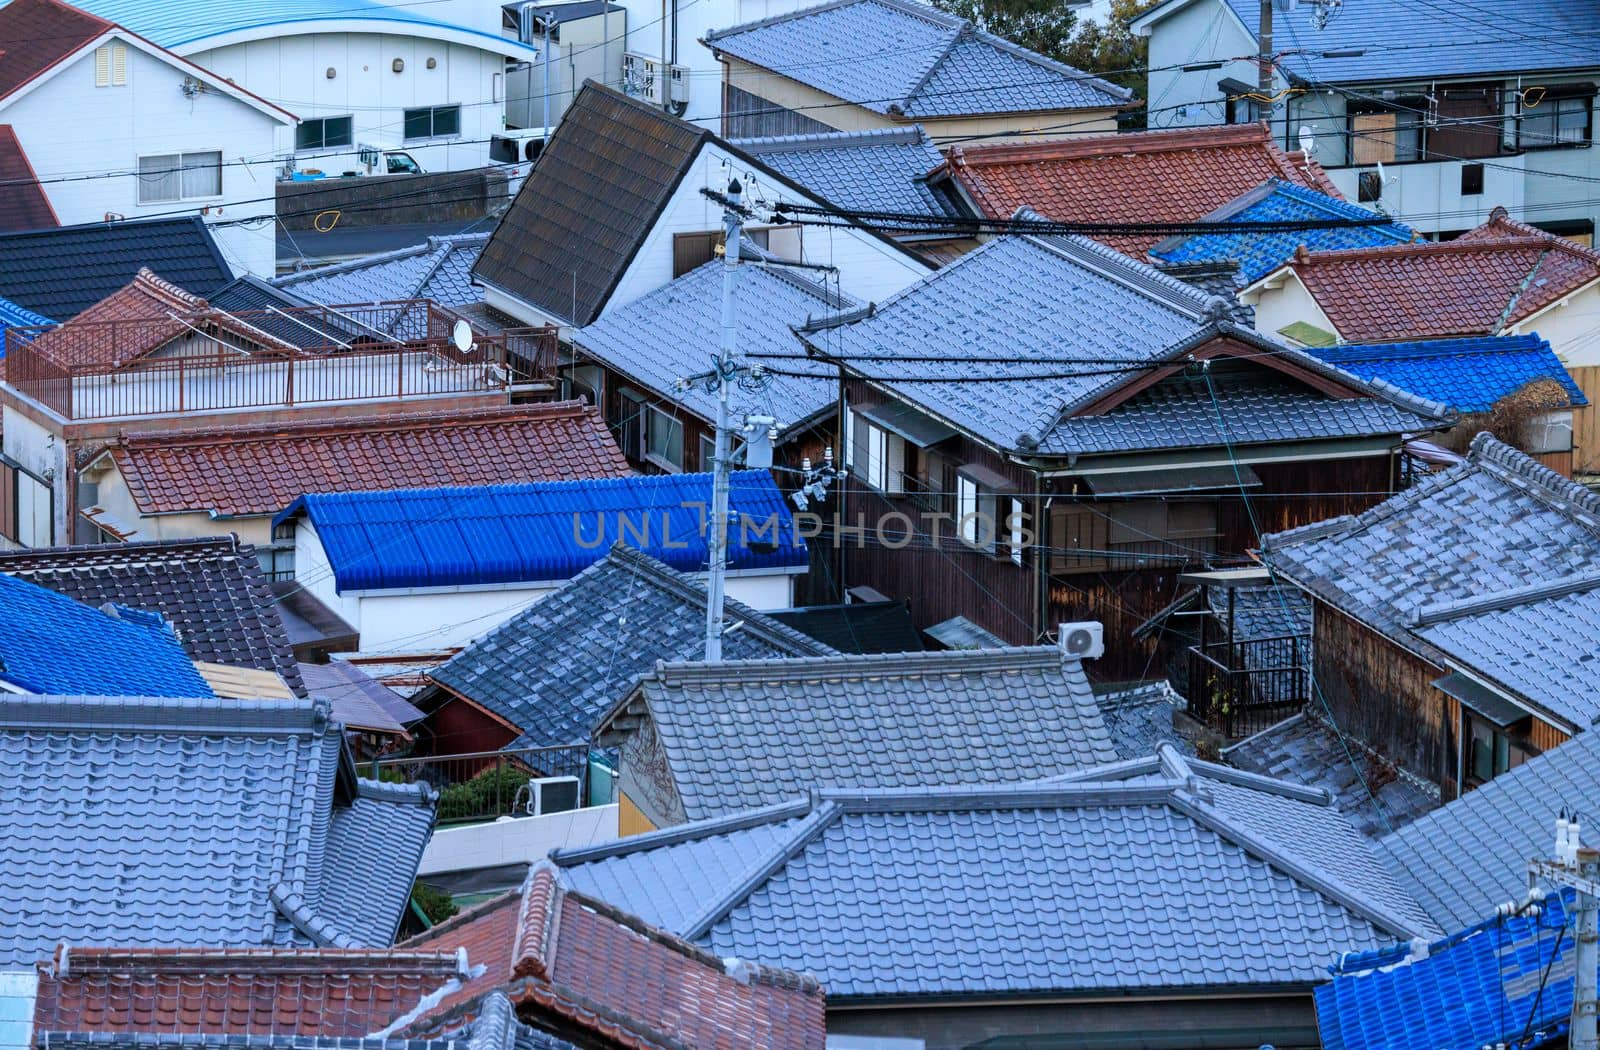 Tiled Roofs on Houses of Dense Residential Neighborhood in Japanese Town. High quality photo